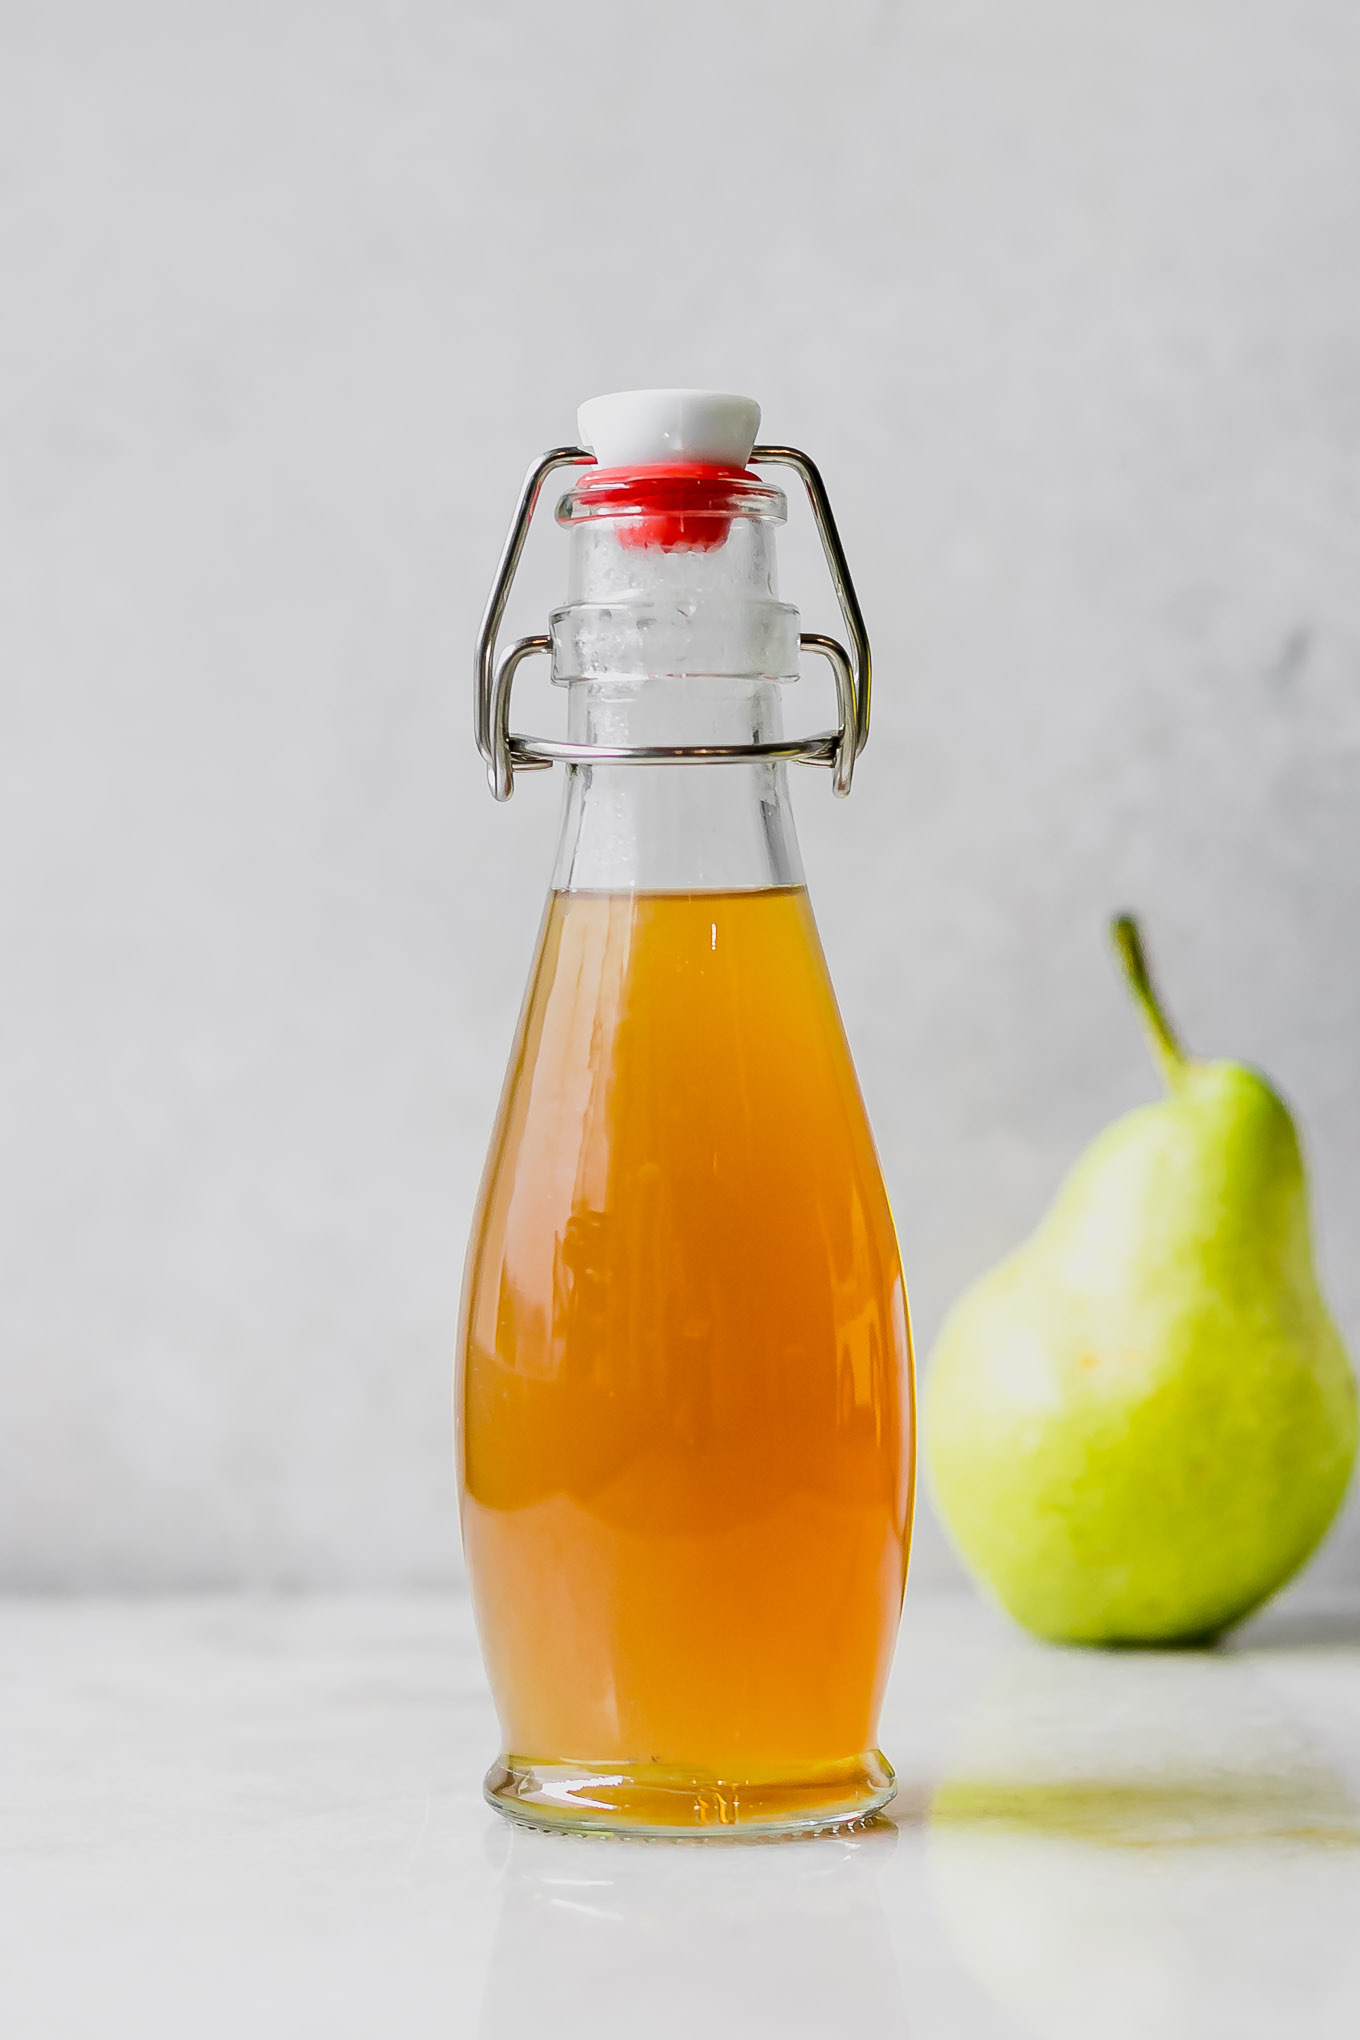 pear infused simple syrup in a glass bottle on a white countertop